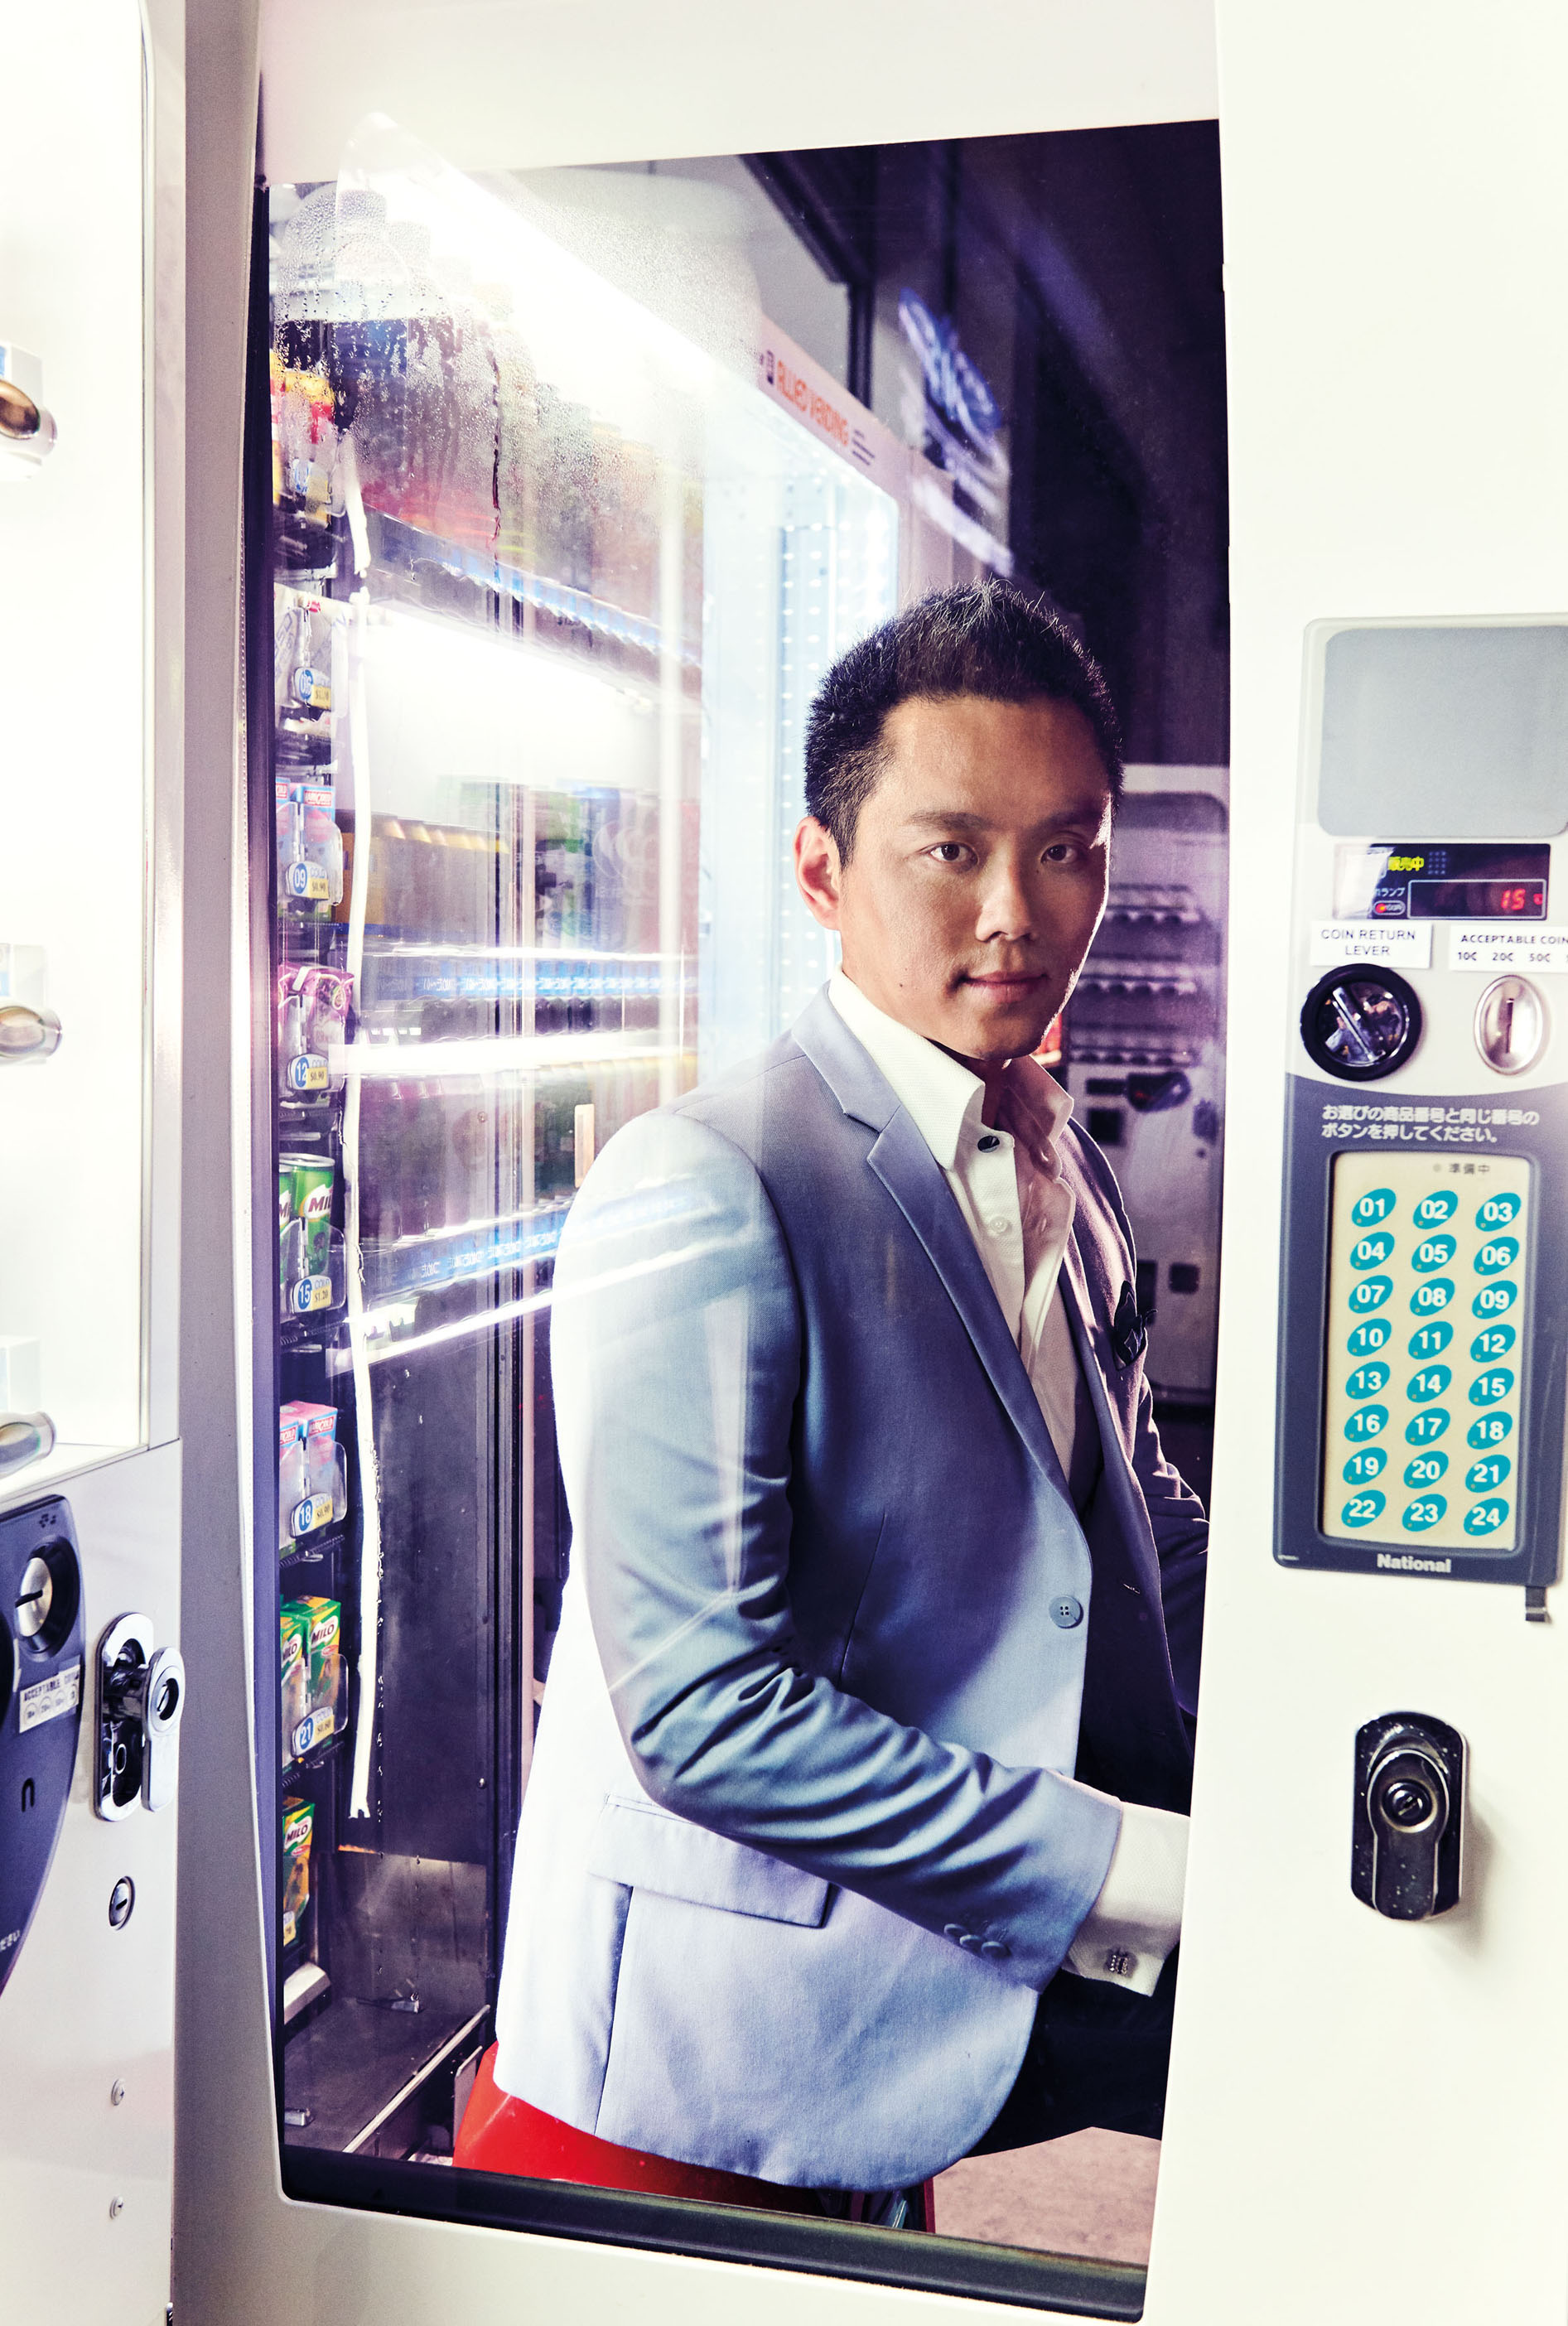 Vernon Tan and the queen of vending machines